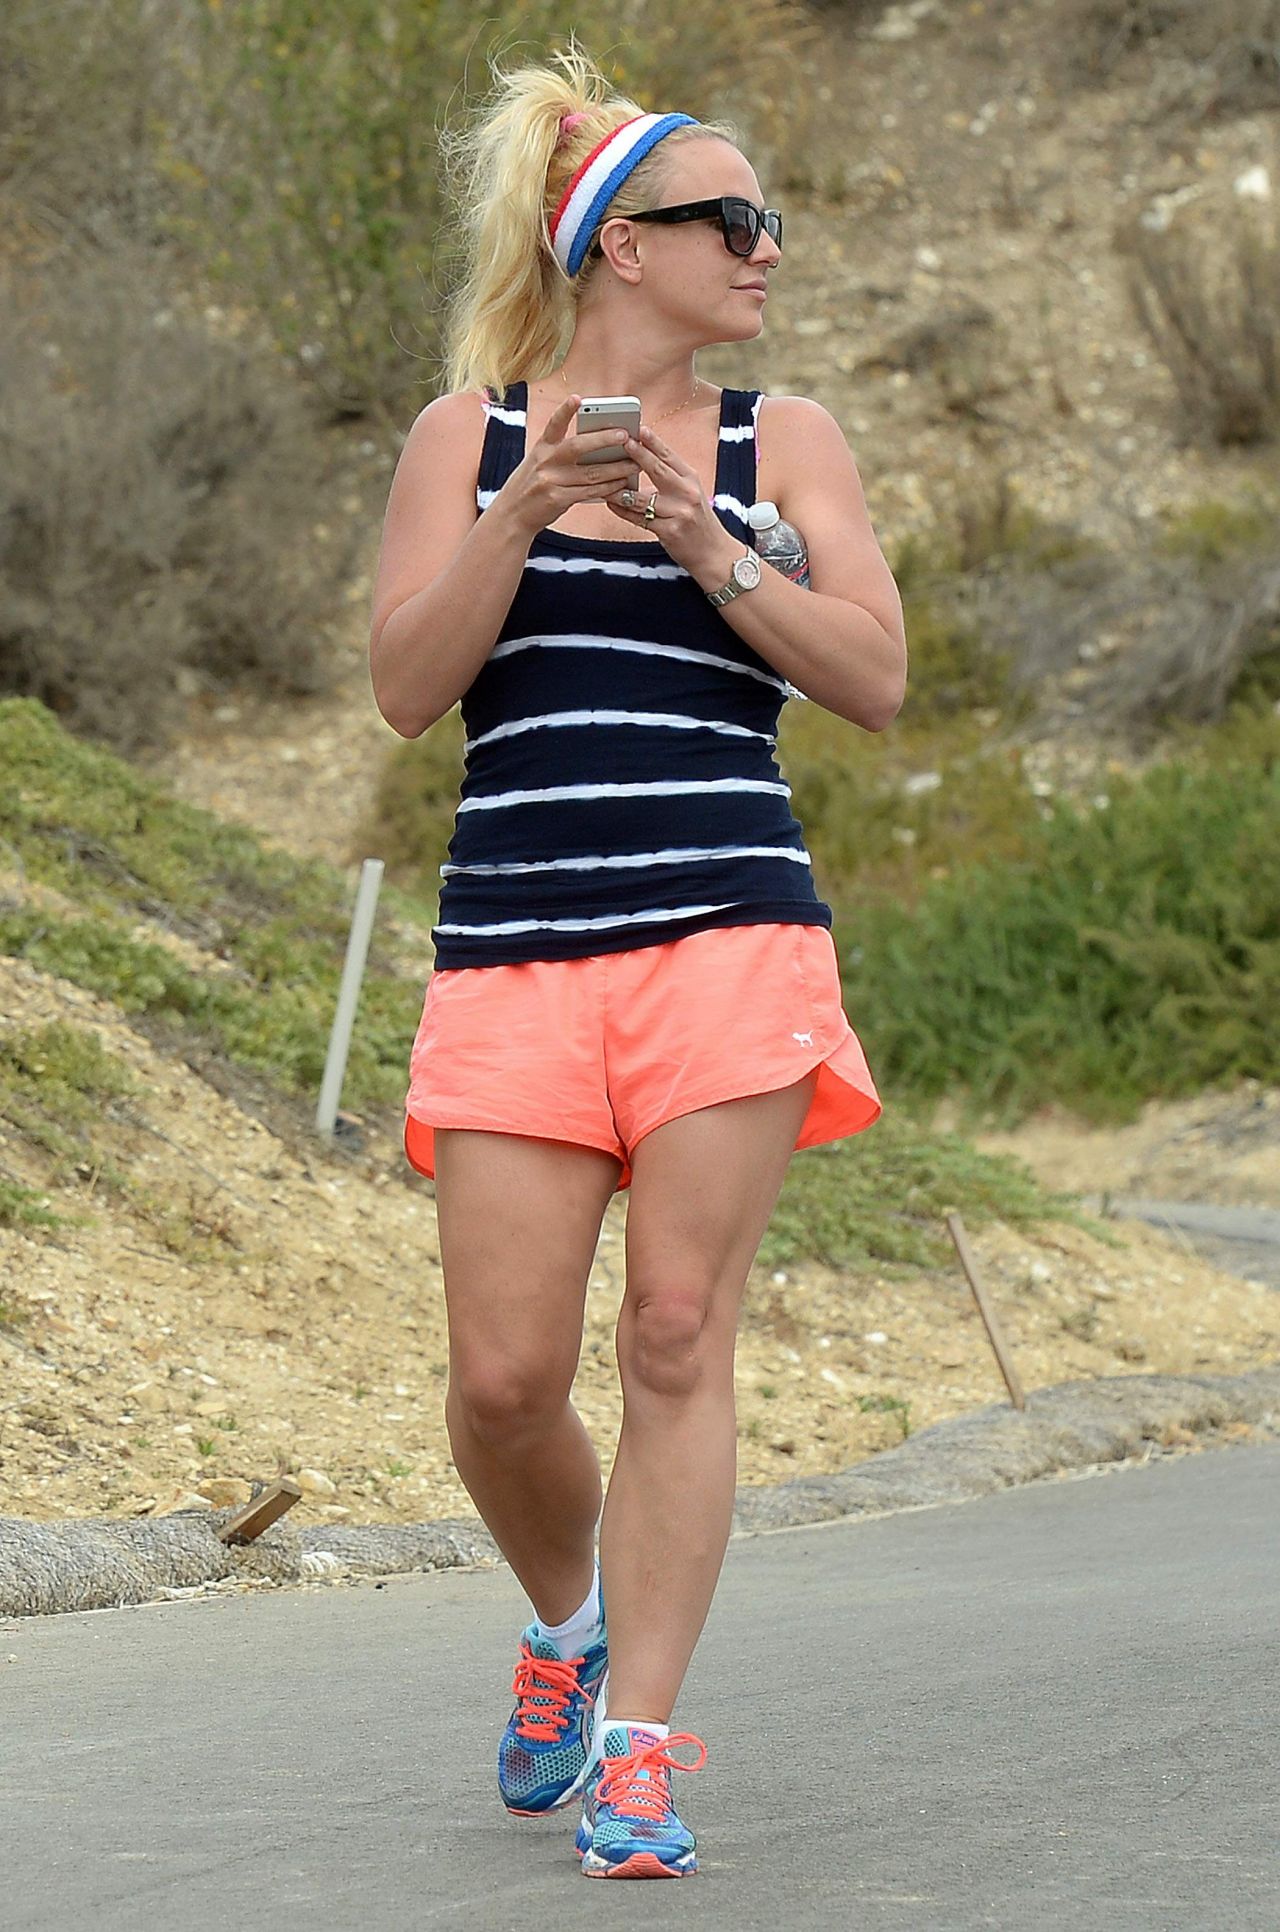 https://celebmafia.com/wp-content/uploads/2015/07/britney-spears-out-about-in-thousand-oaks-july-2015_9.jpg